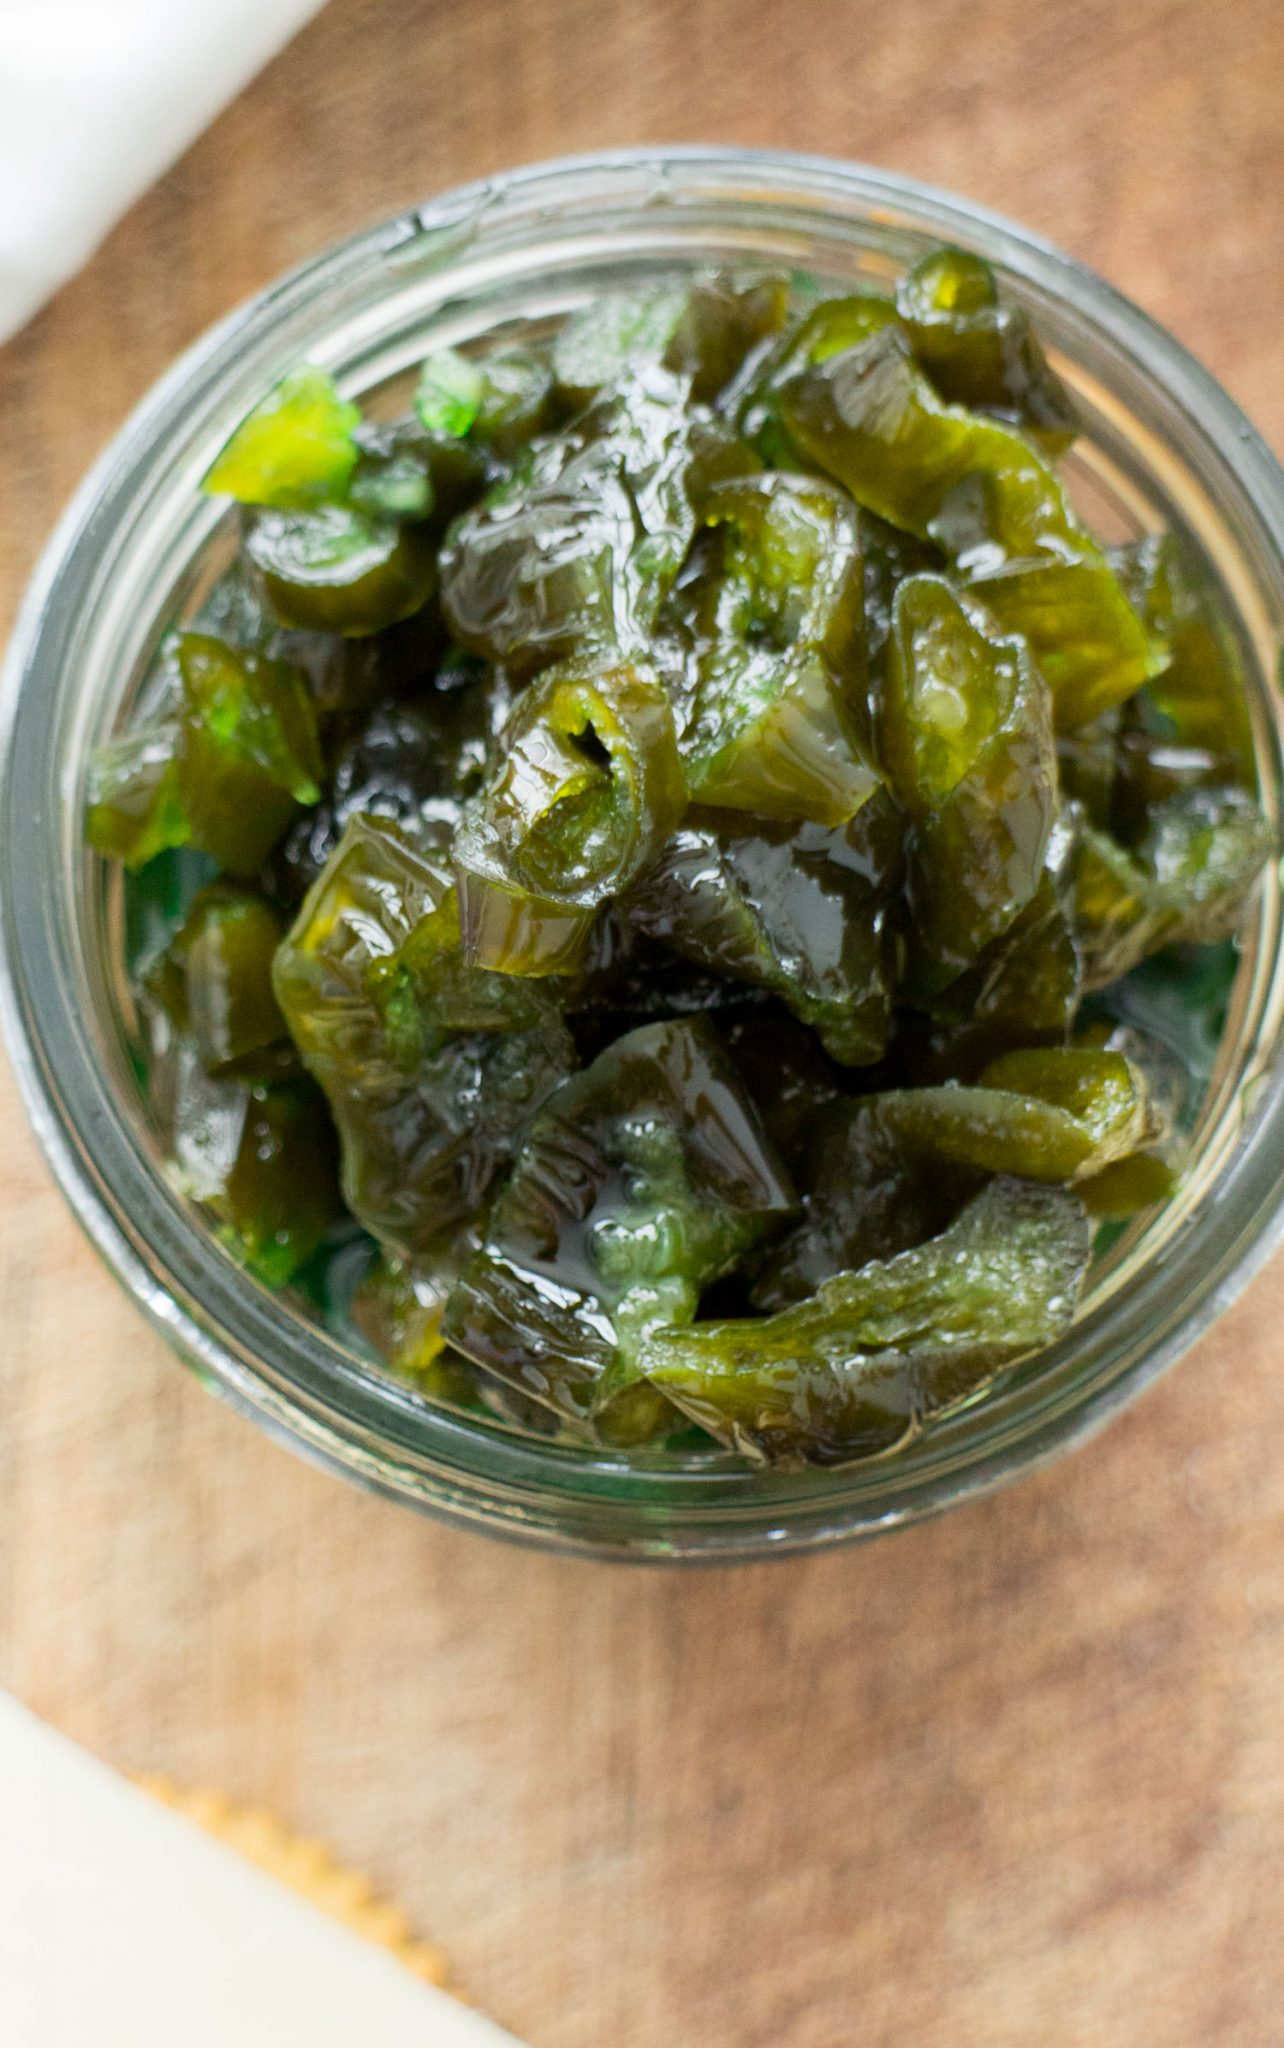 Candied Jalapenos Recipe - You Only Need 3 Ingredients!